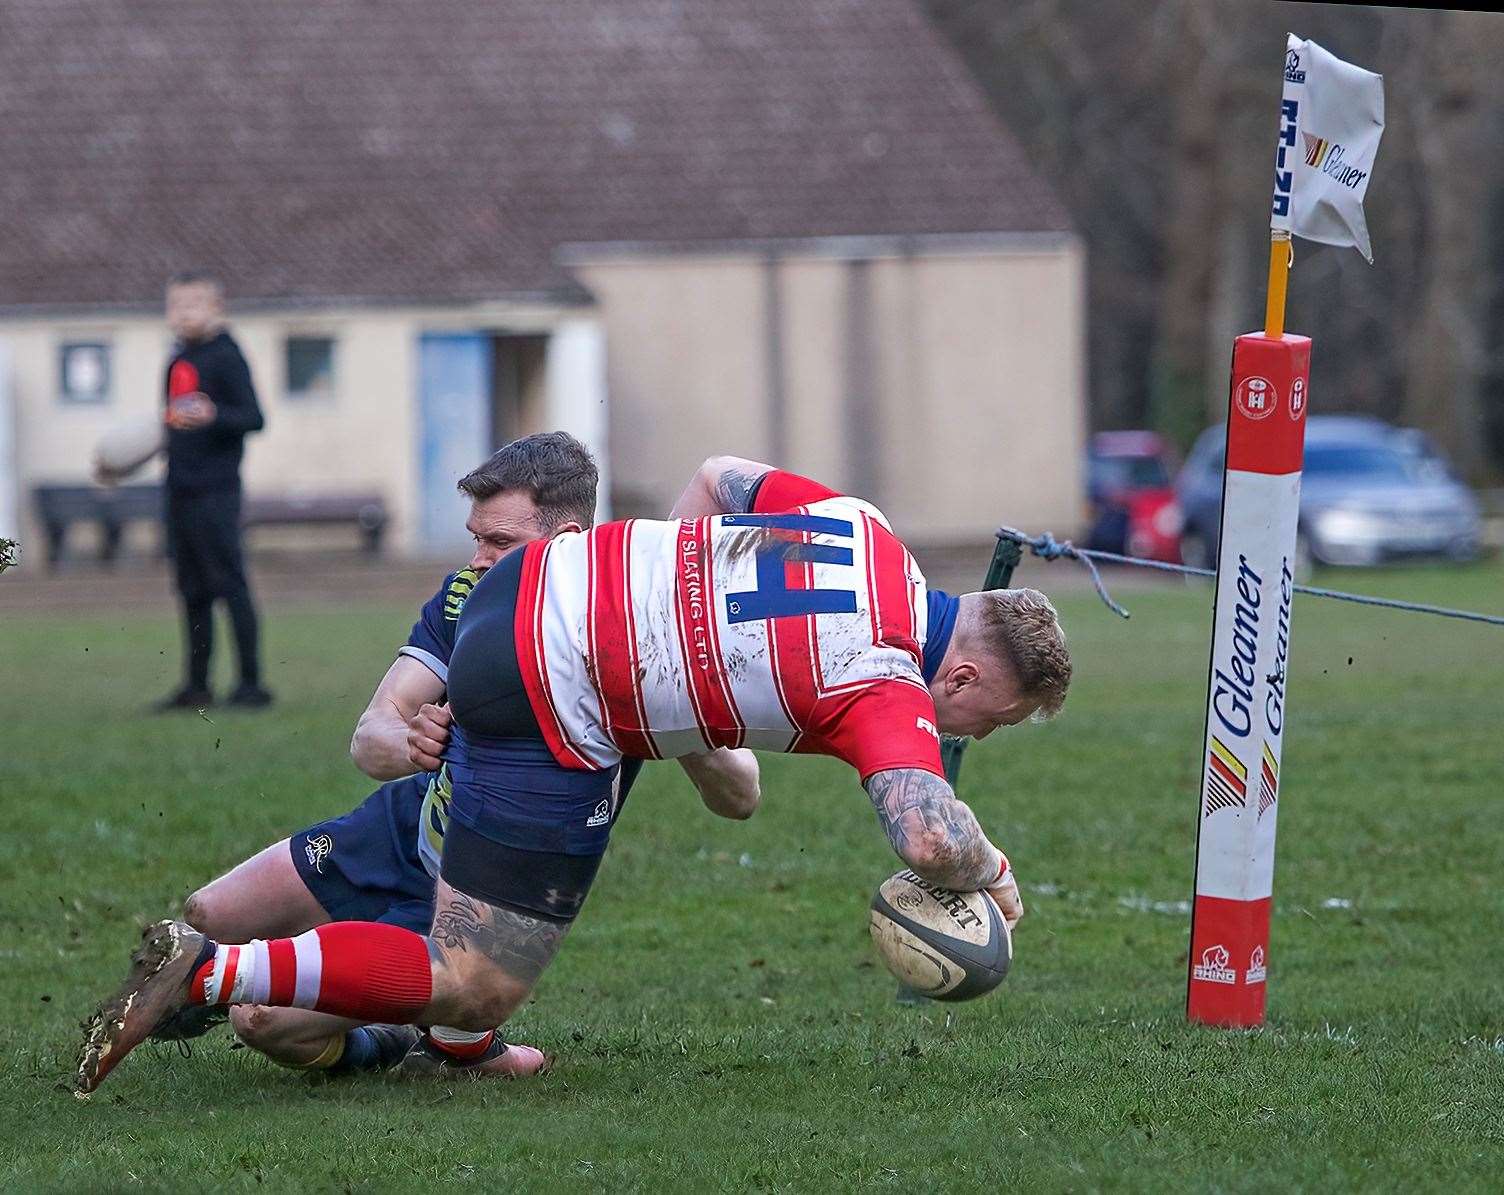 Lewis Scott gets tackled by his opposite number. Picture: John MacGregor